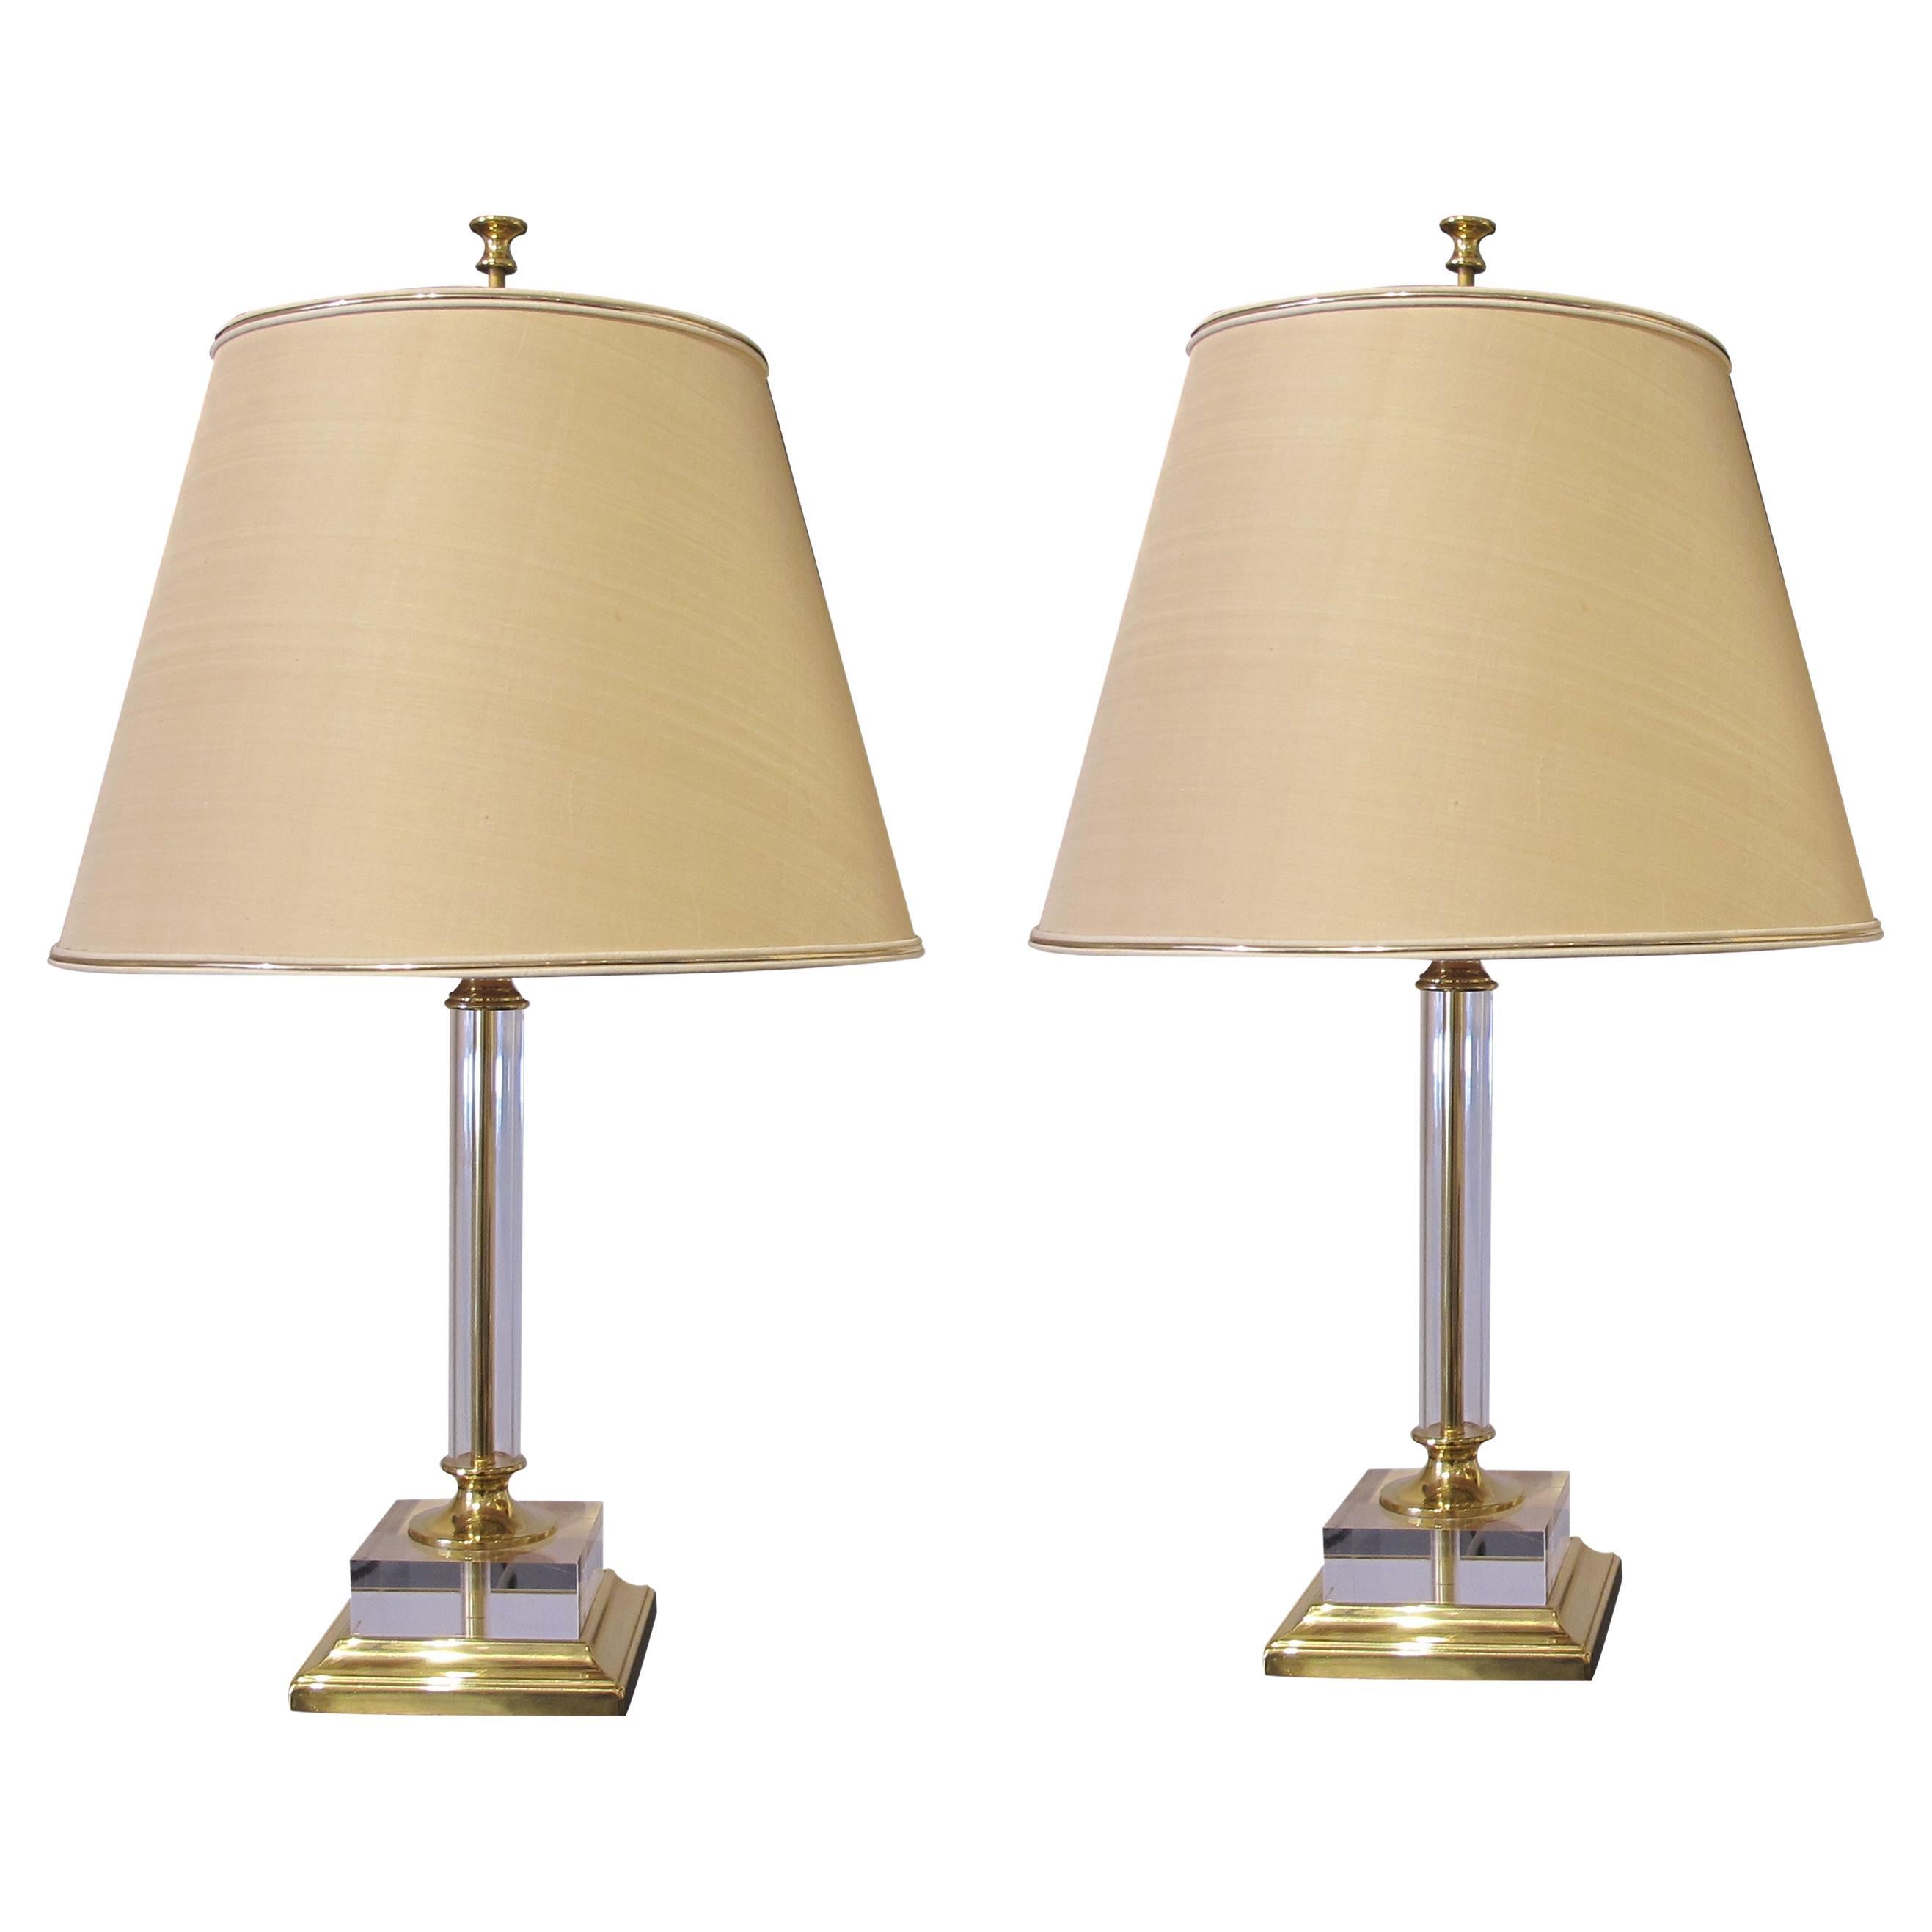 Pair of Large 1970s Italian Lucite & Brass Table Lamps with Conical Lampshades